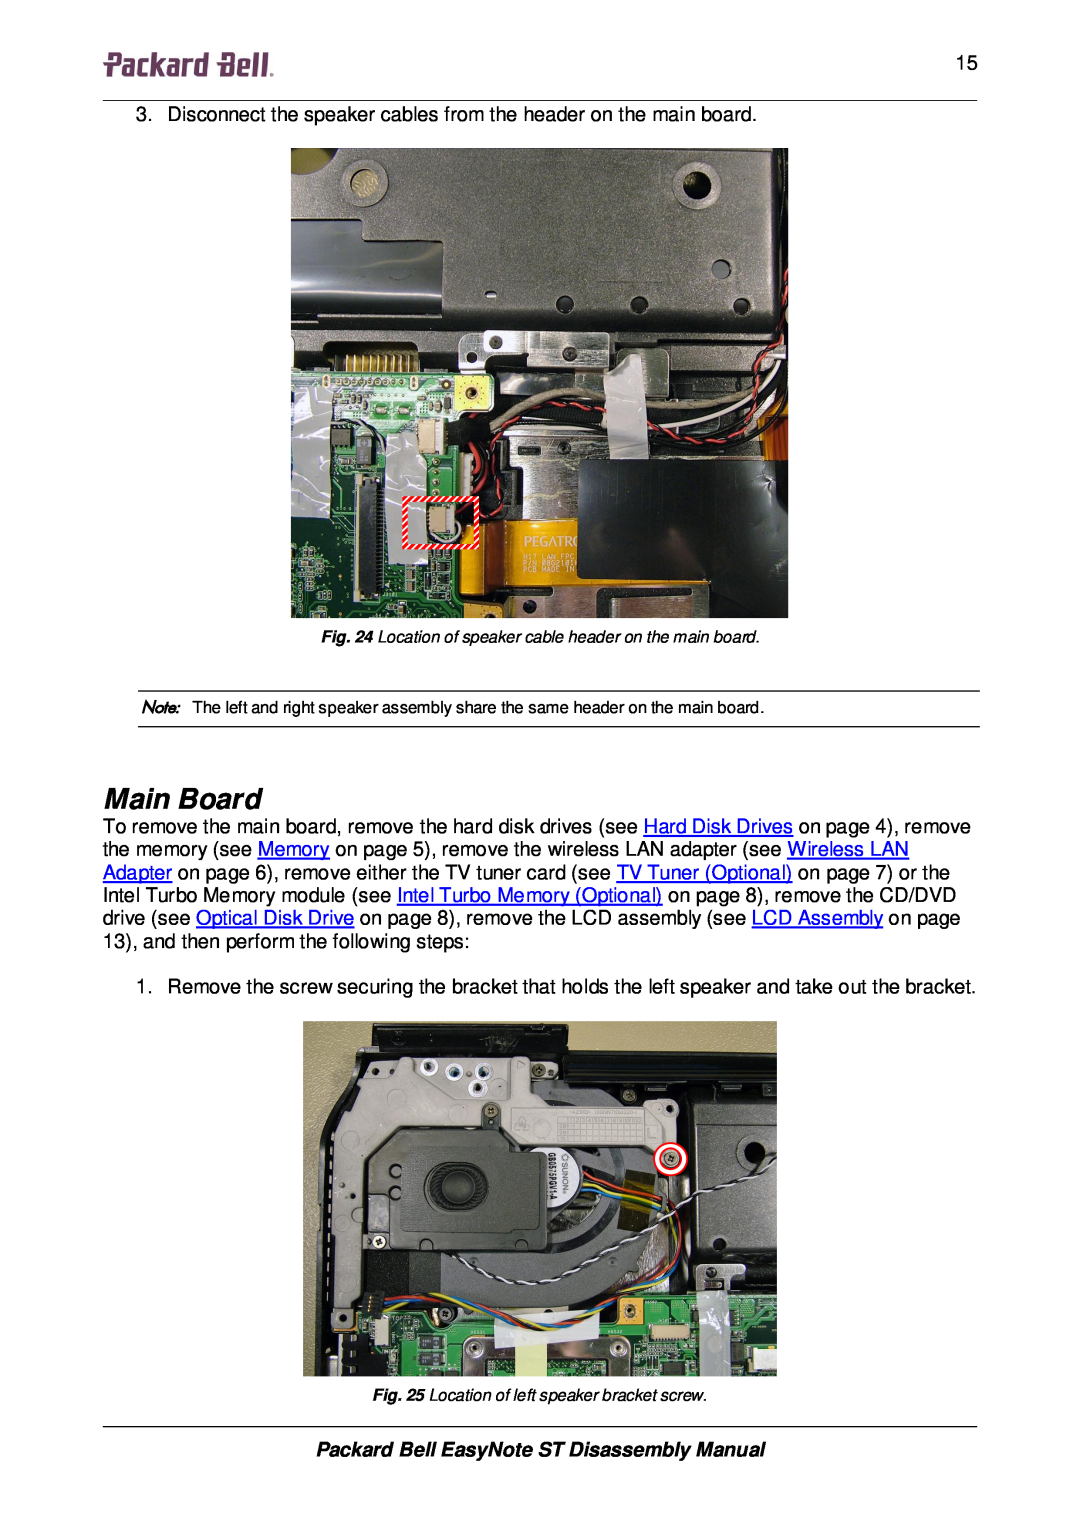 Packard Bell manual Main Board, Packard Bell EasyNote ST Disassembly Manual 